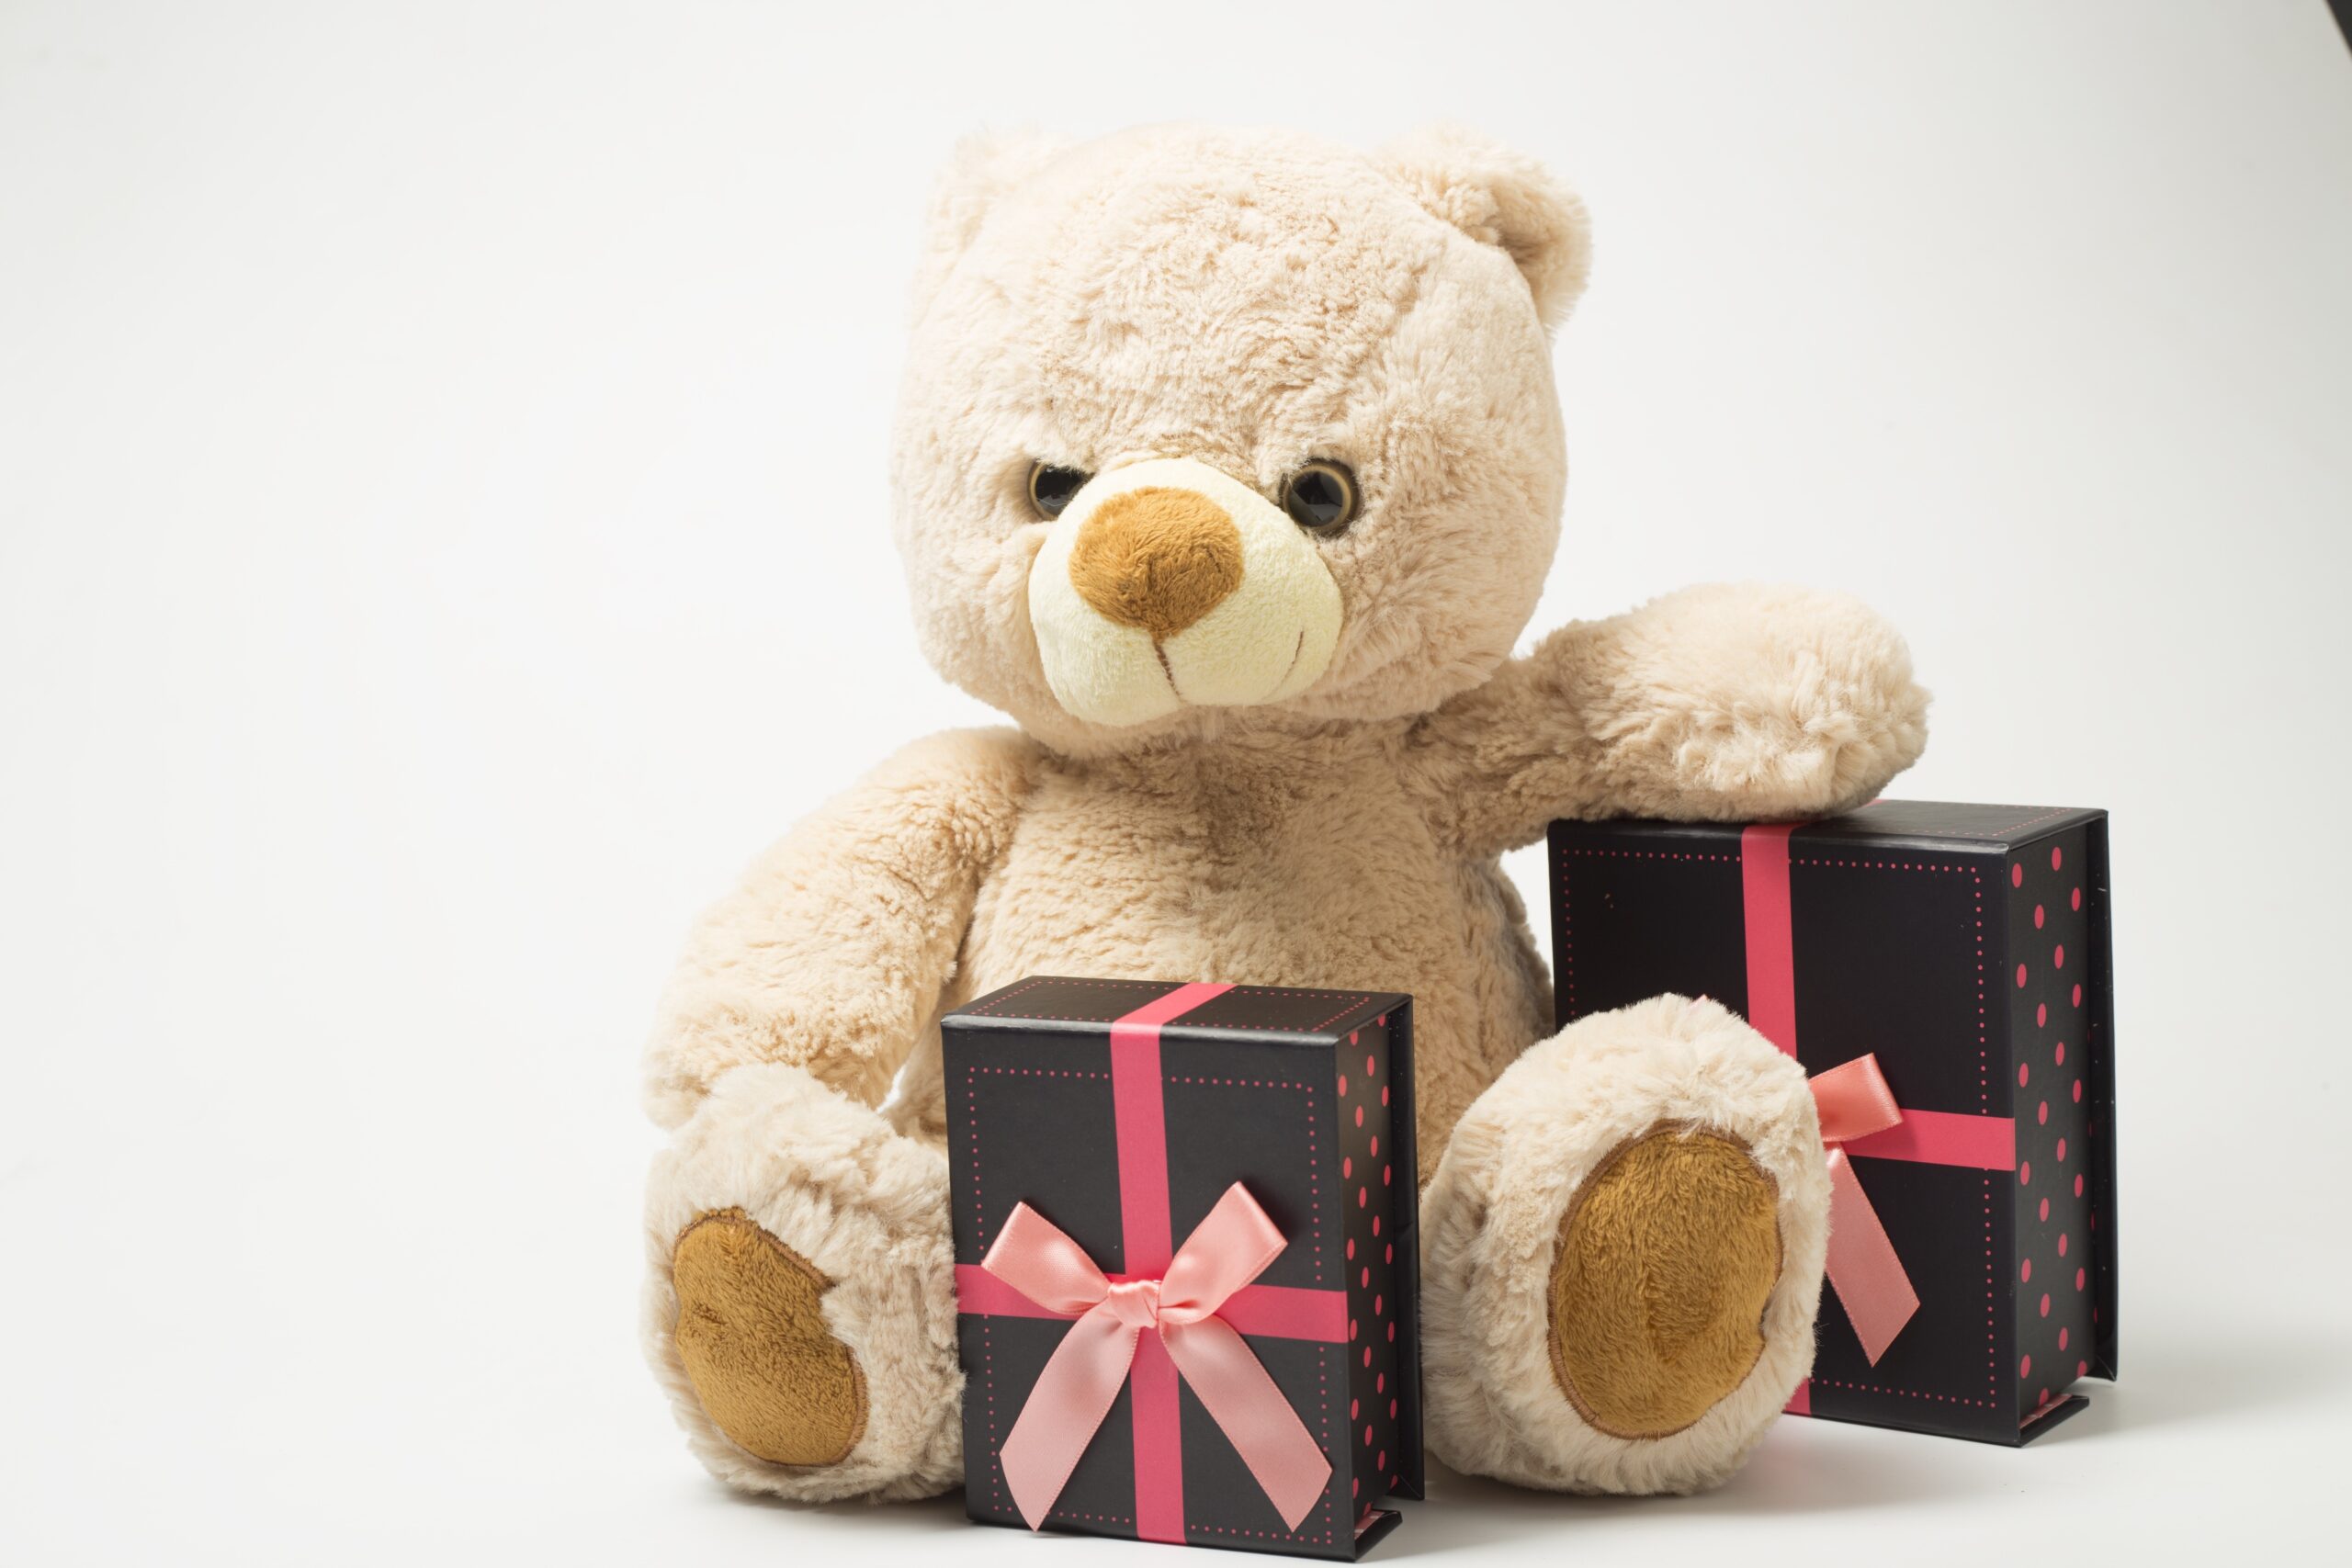 A sassy tan teddy bear sitting with two small wrapped gifts